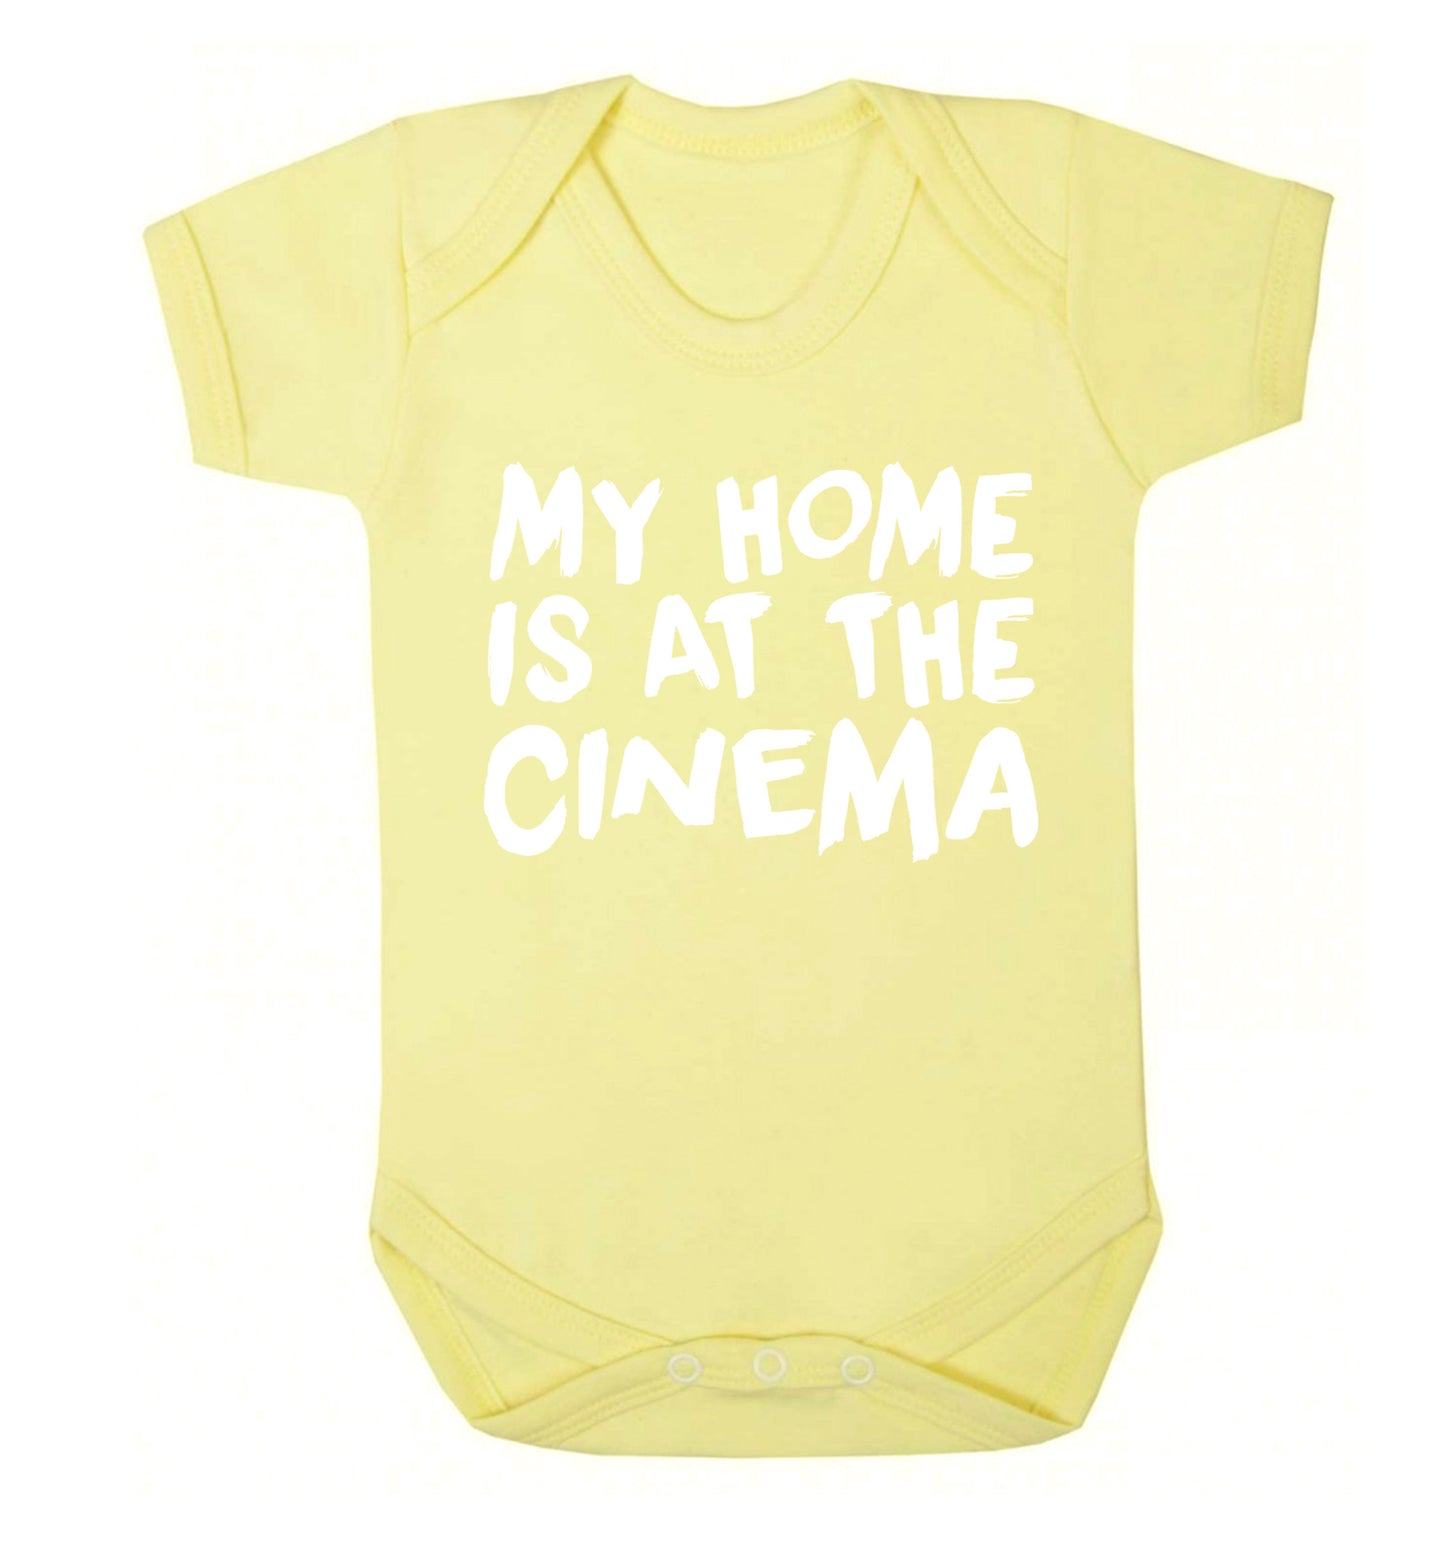 My home is at the cinema Baby Vest pale yellow 18-24 months